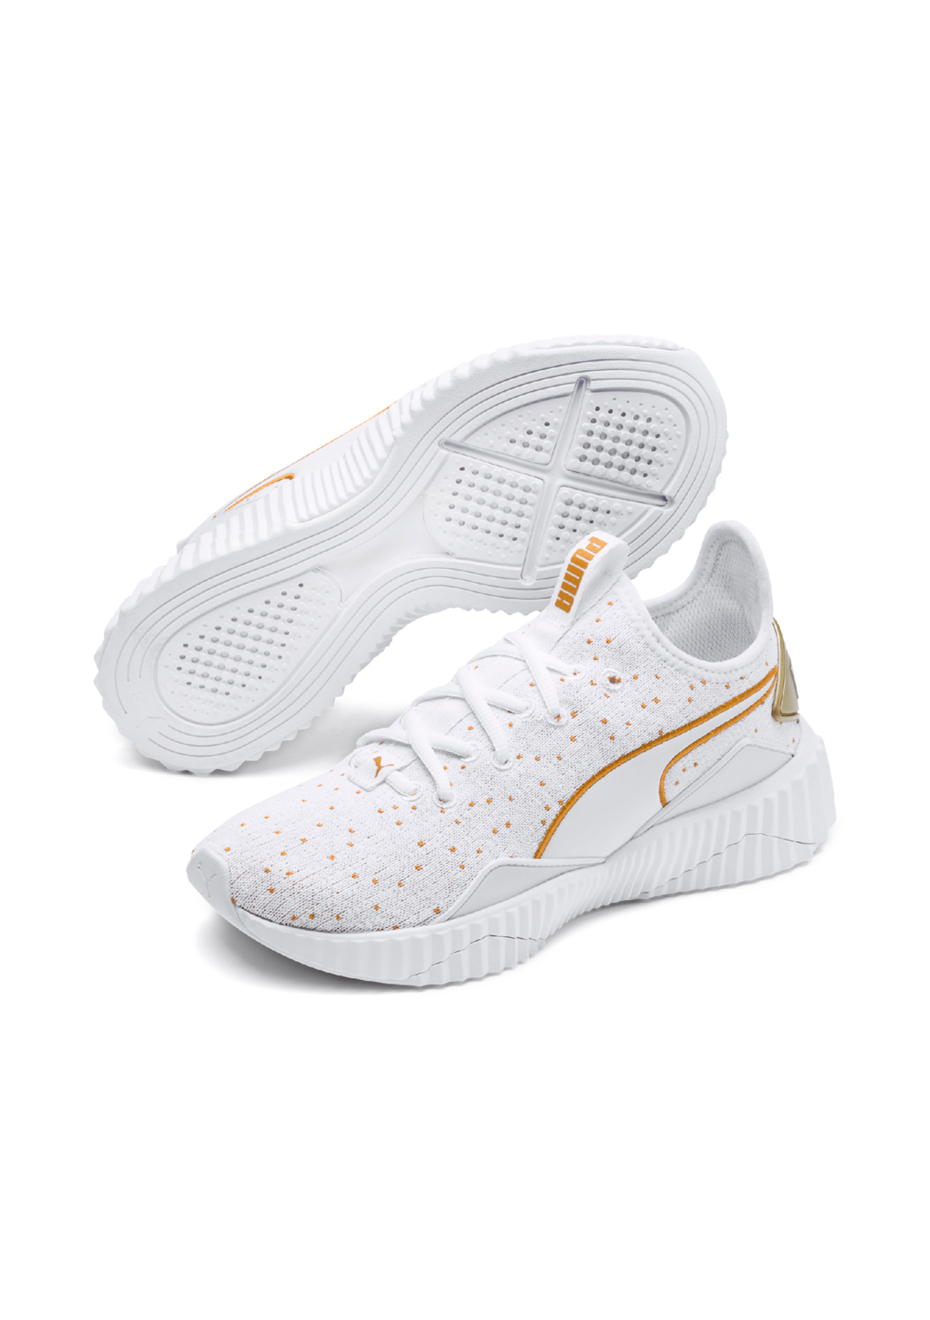 women's white and gold pumas